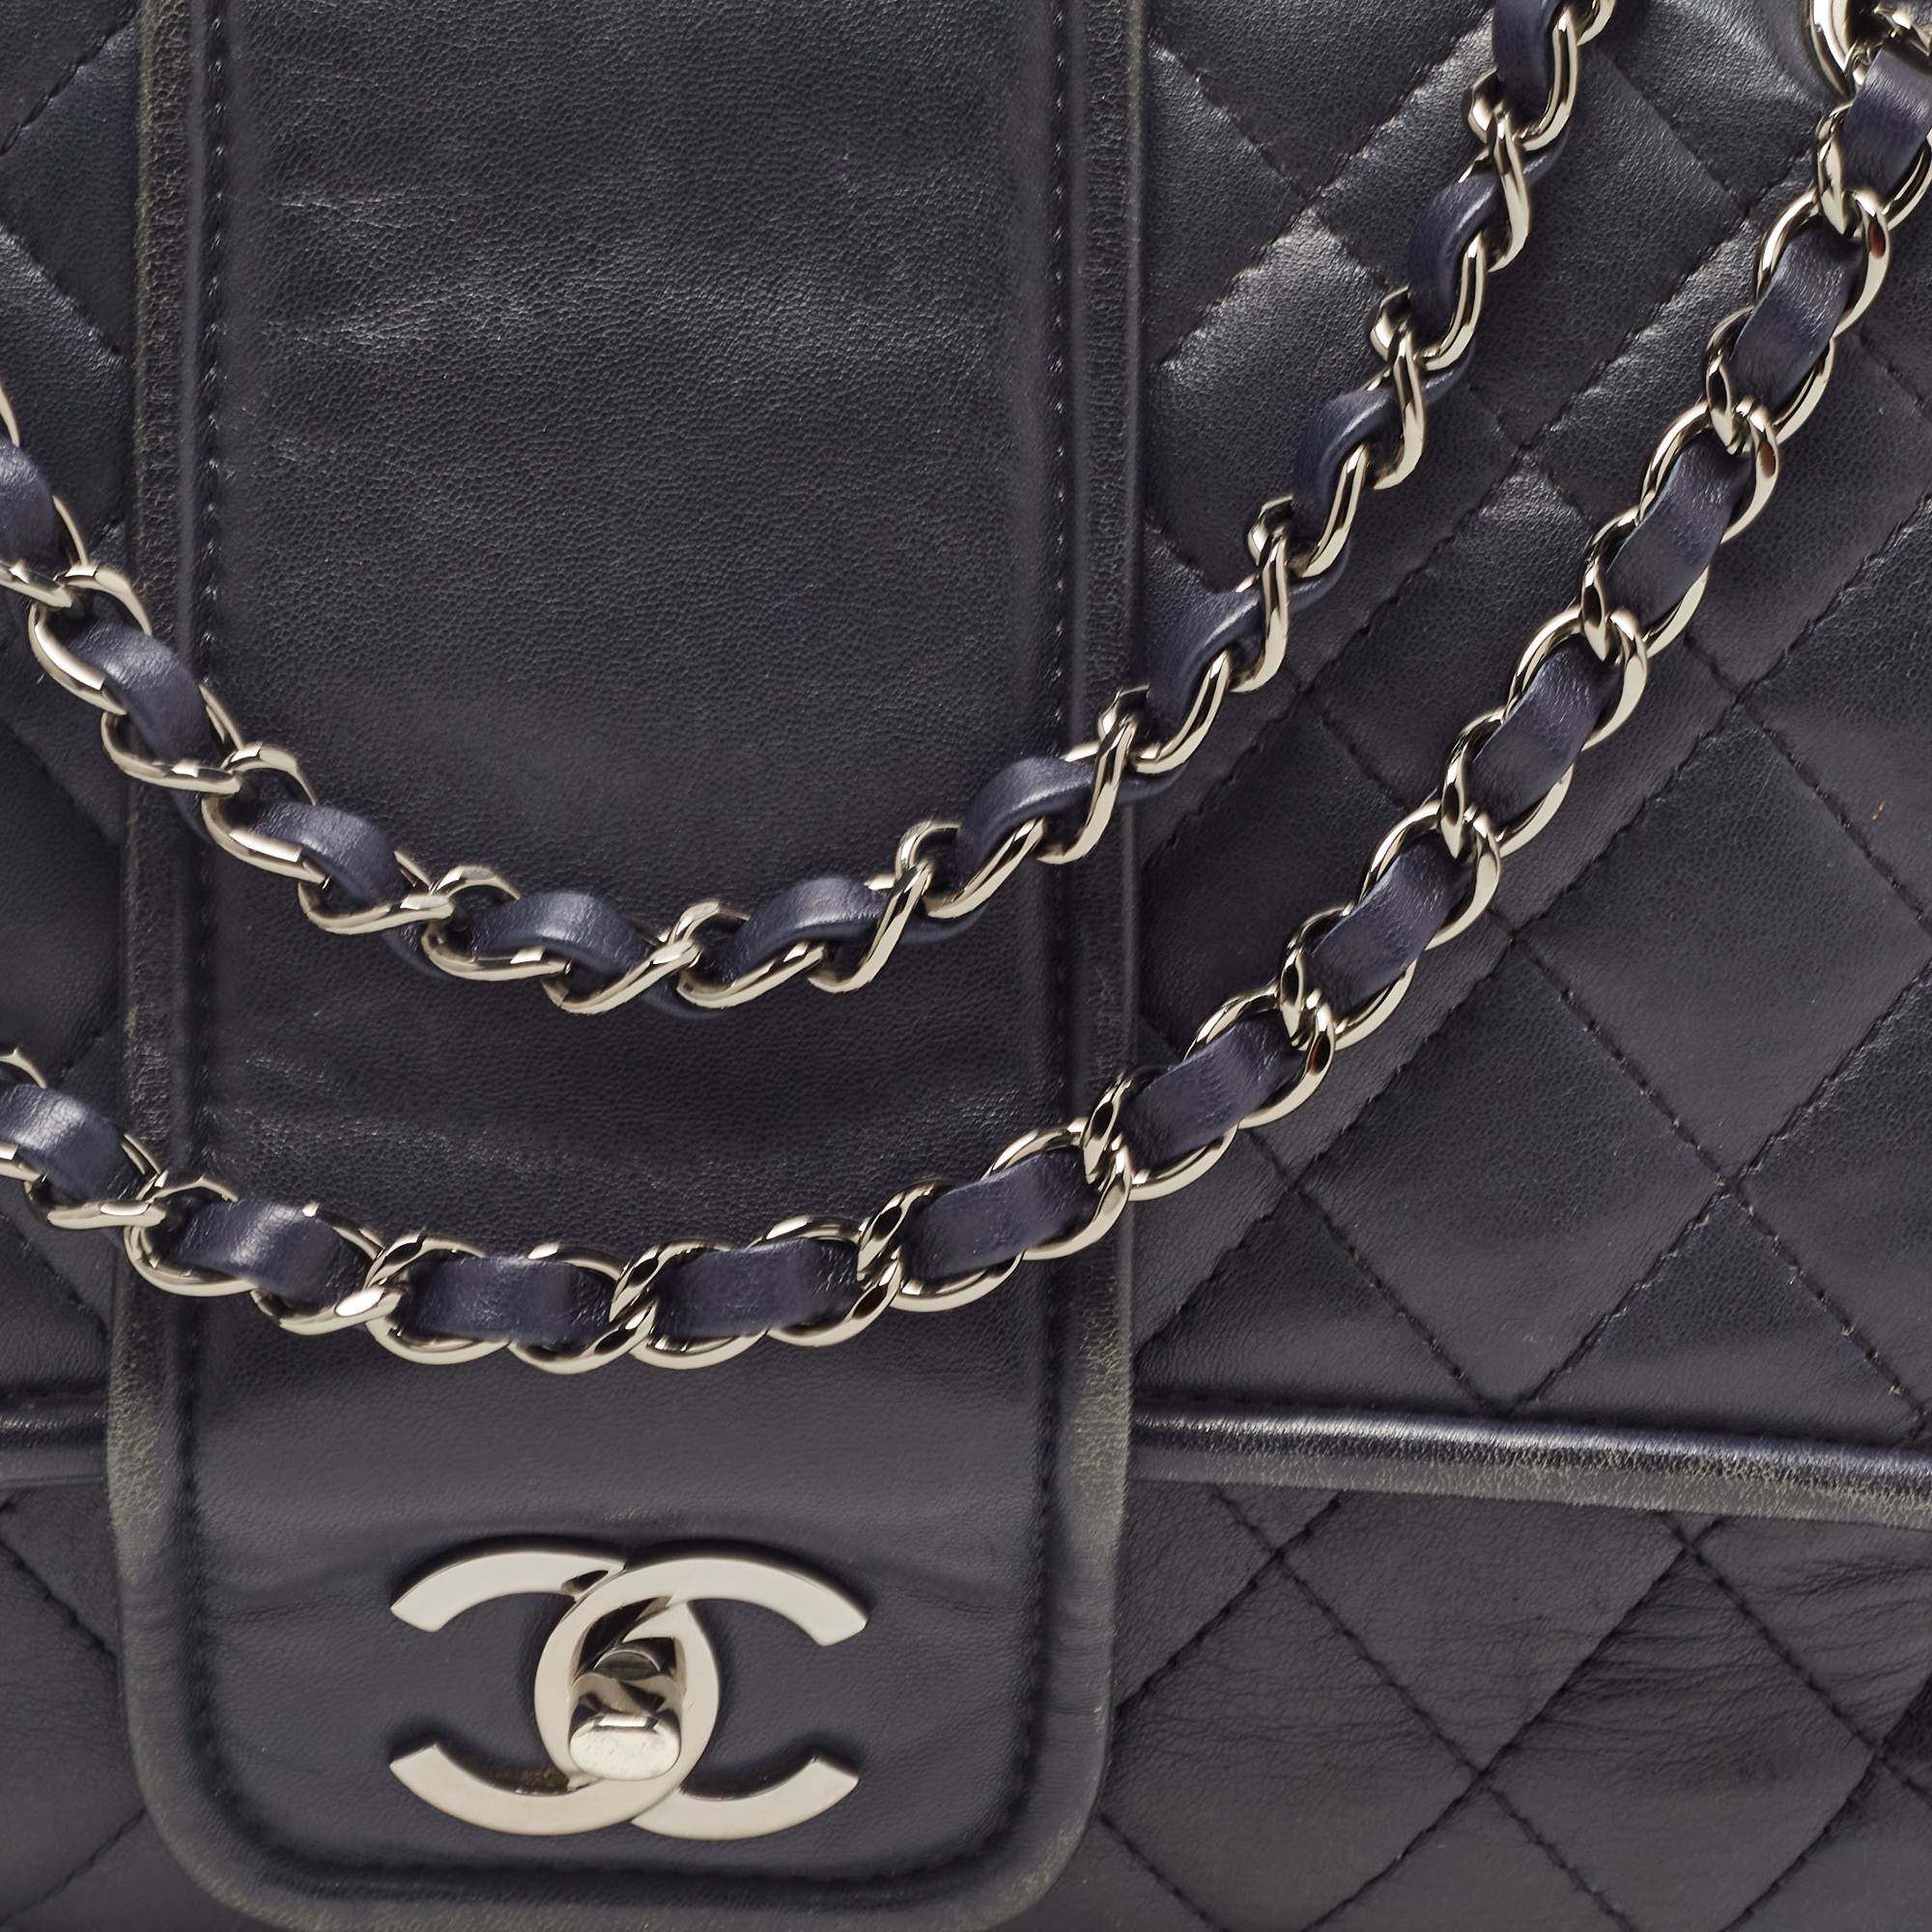 Chanel Navy Blue Quilted Leather Elementary Chic Flap Bag